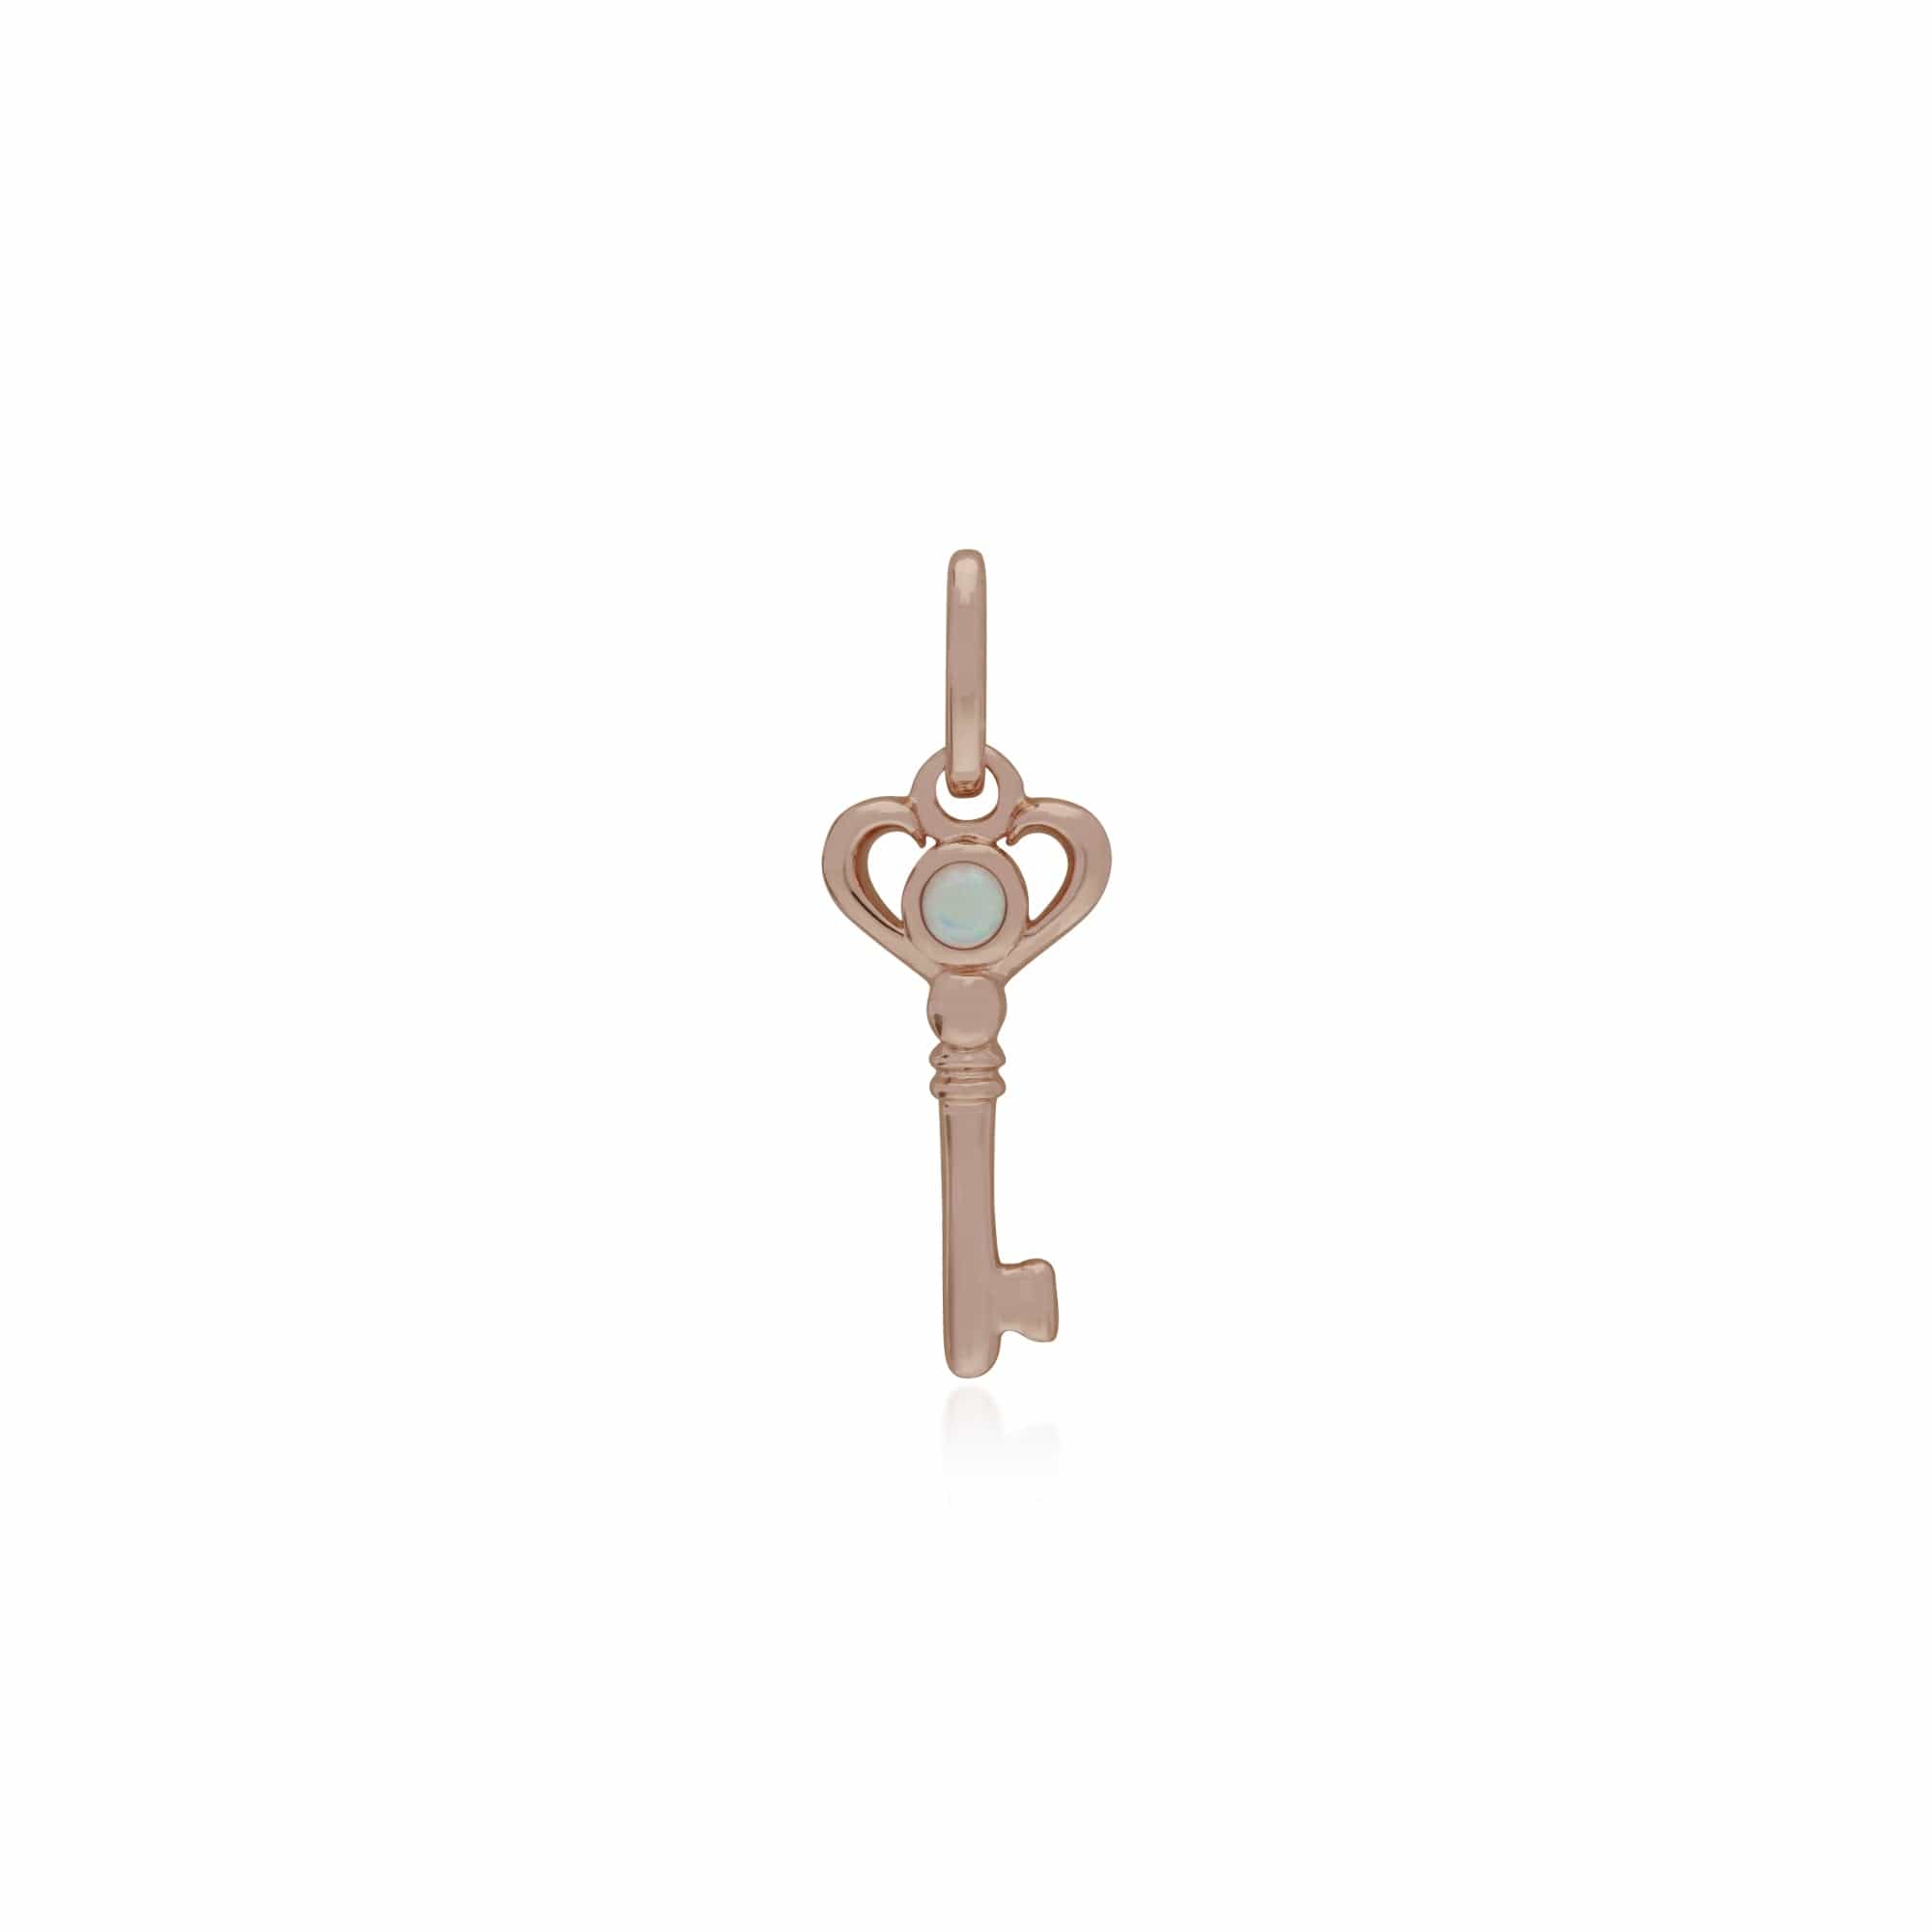 270P028602925-270P026901925 Classic Heart Lock Pendant & Opal Key Charm in Rose Gold Plated 925 Sterling Silver 2